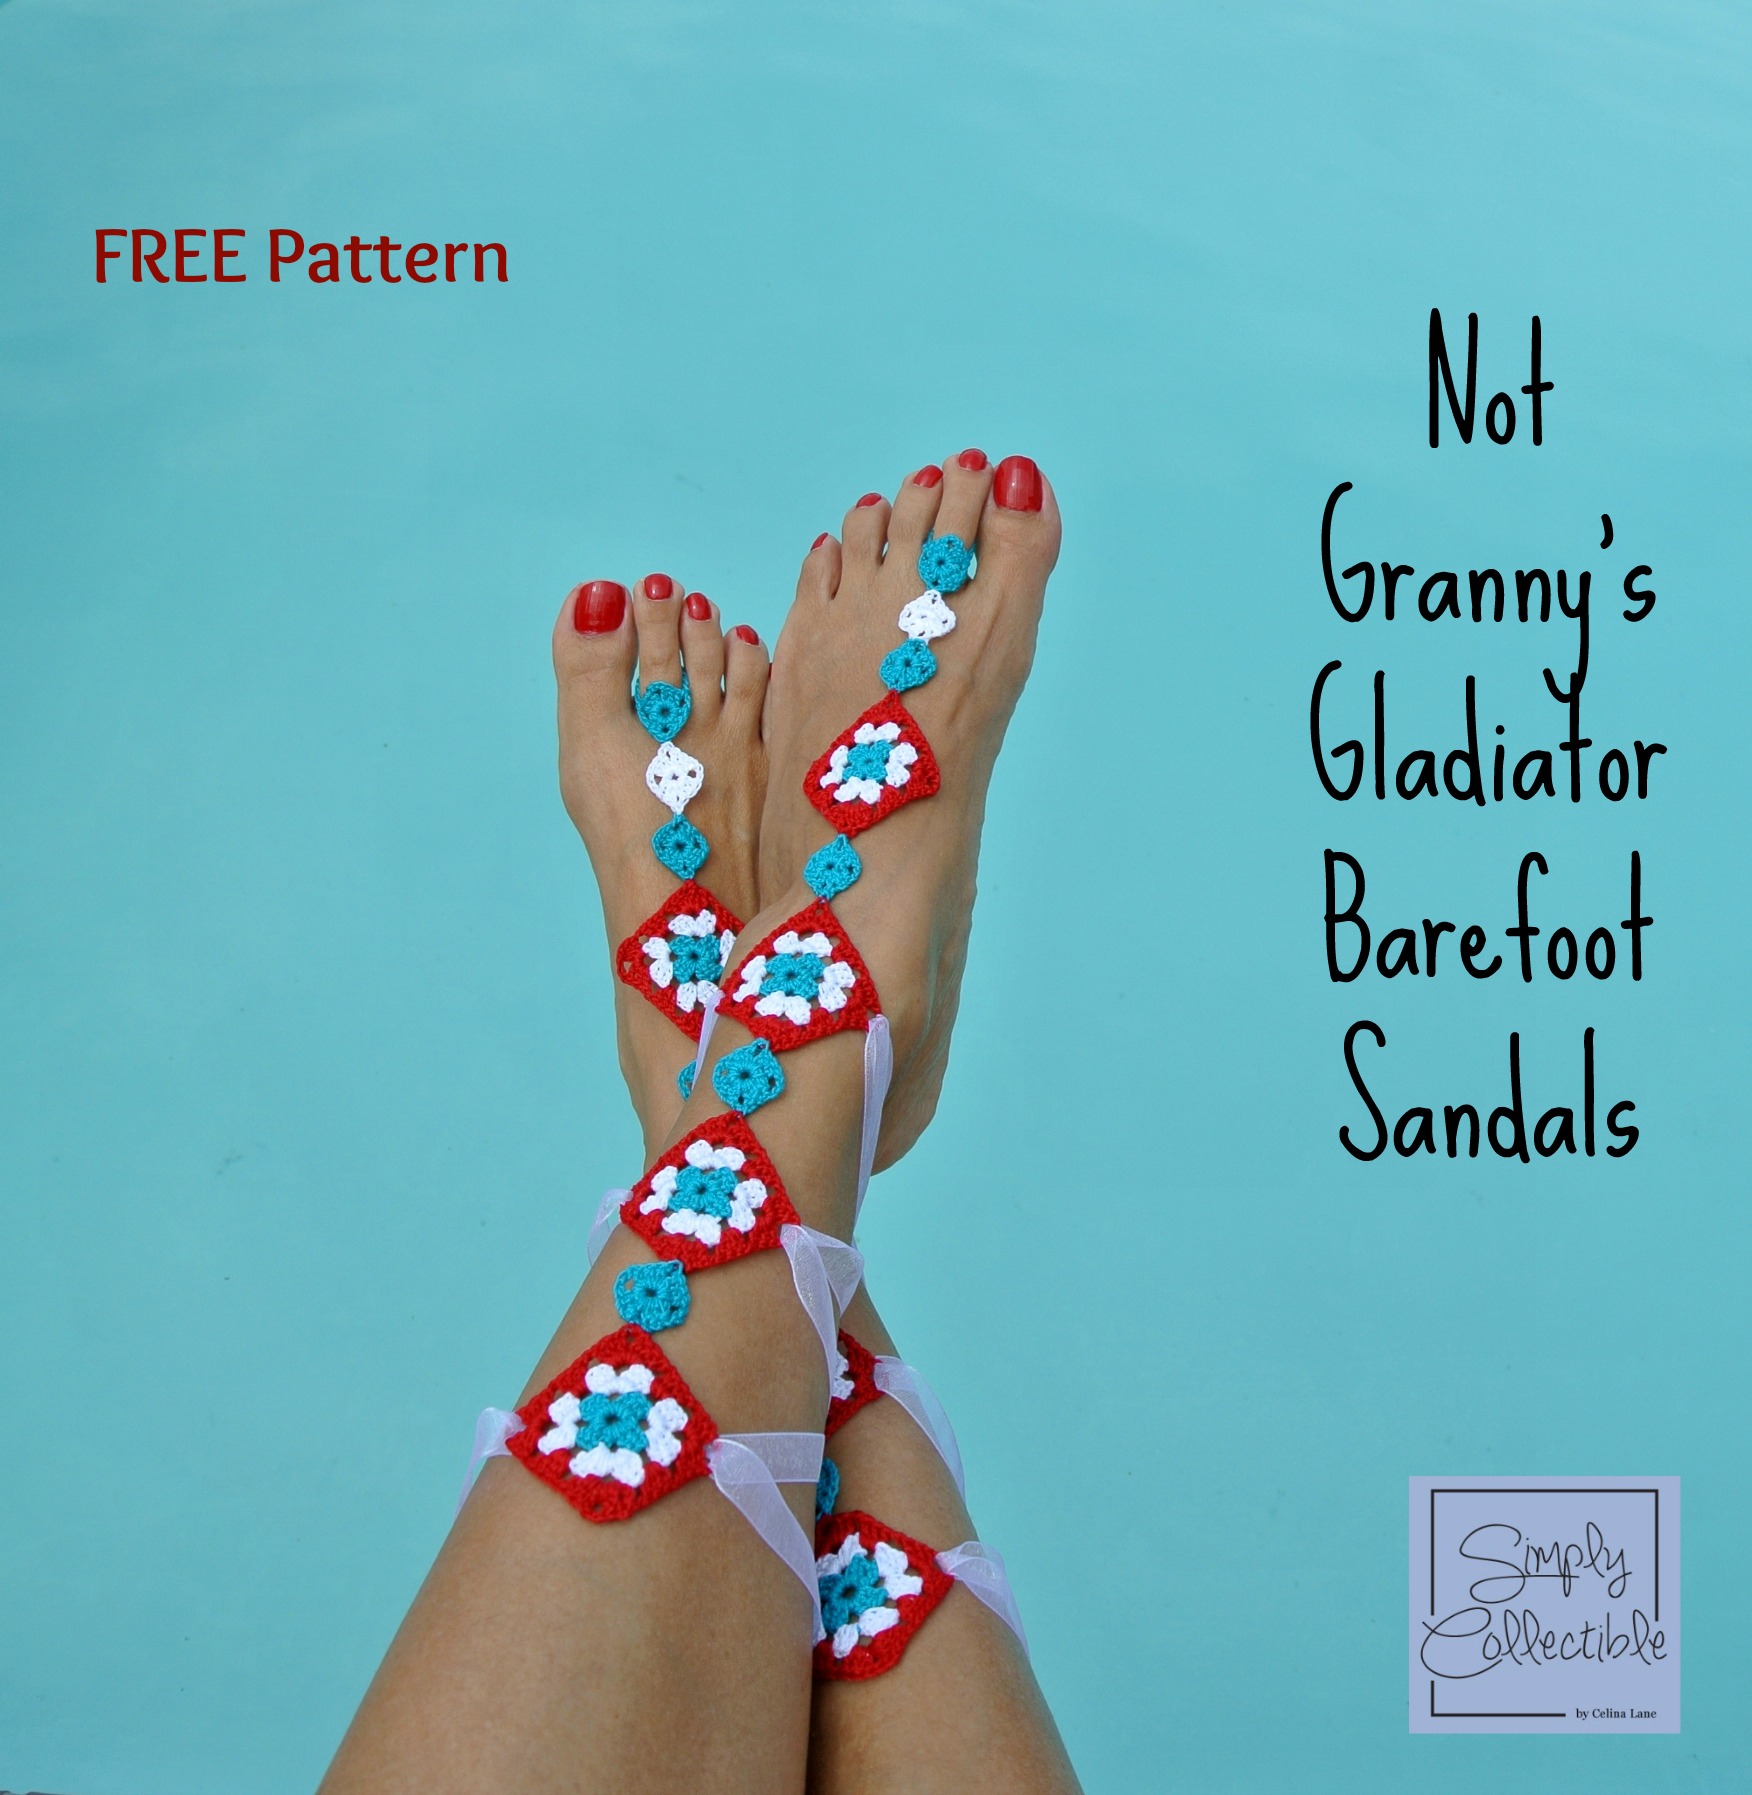 Awesome Crochet Barefoot Sandals Patterns - - Cool Creativities - YouTube